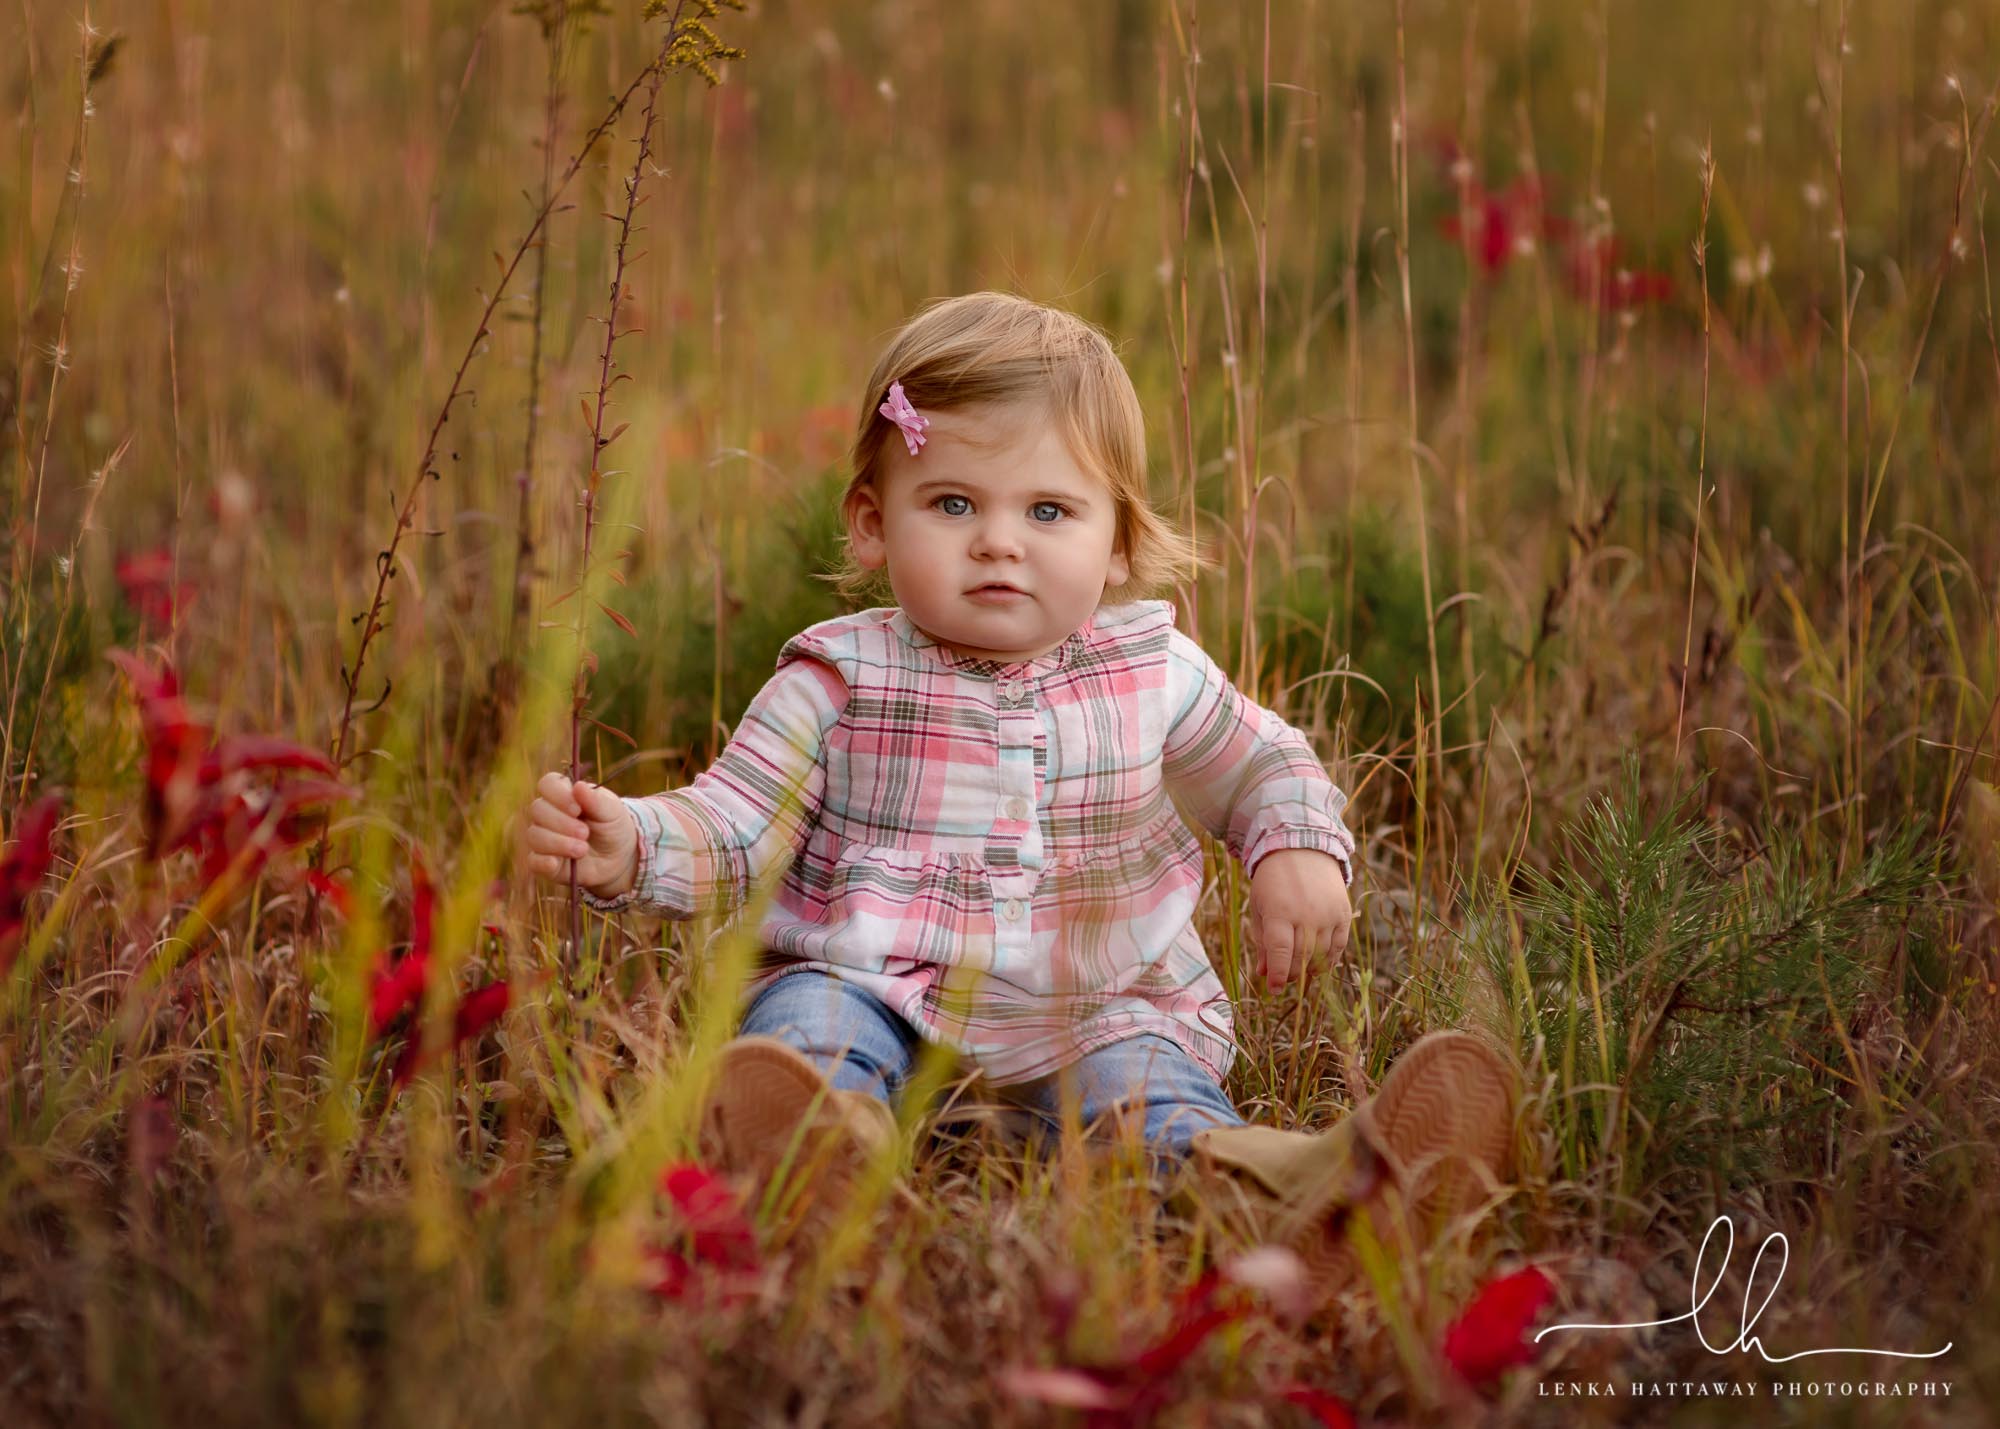 Baby milestone photo session in tall grass.